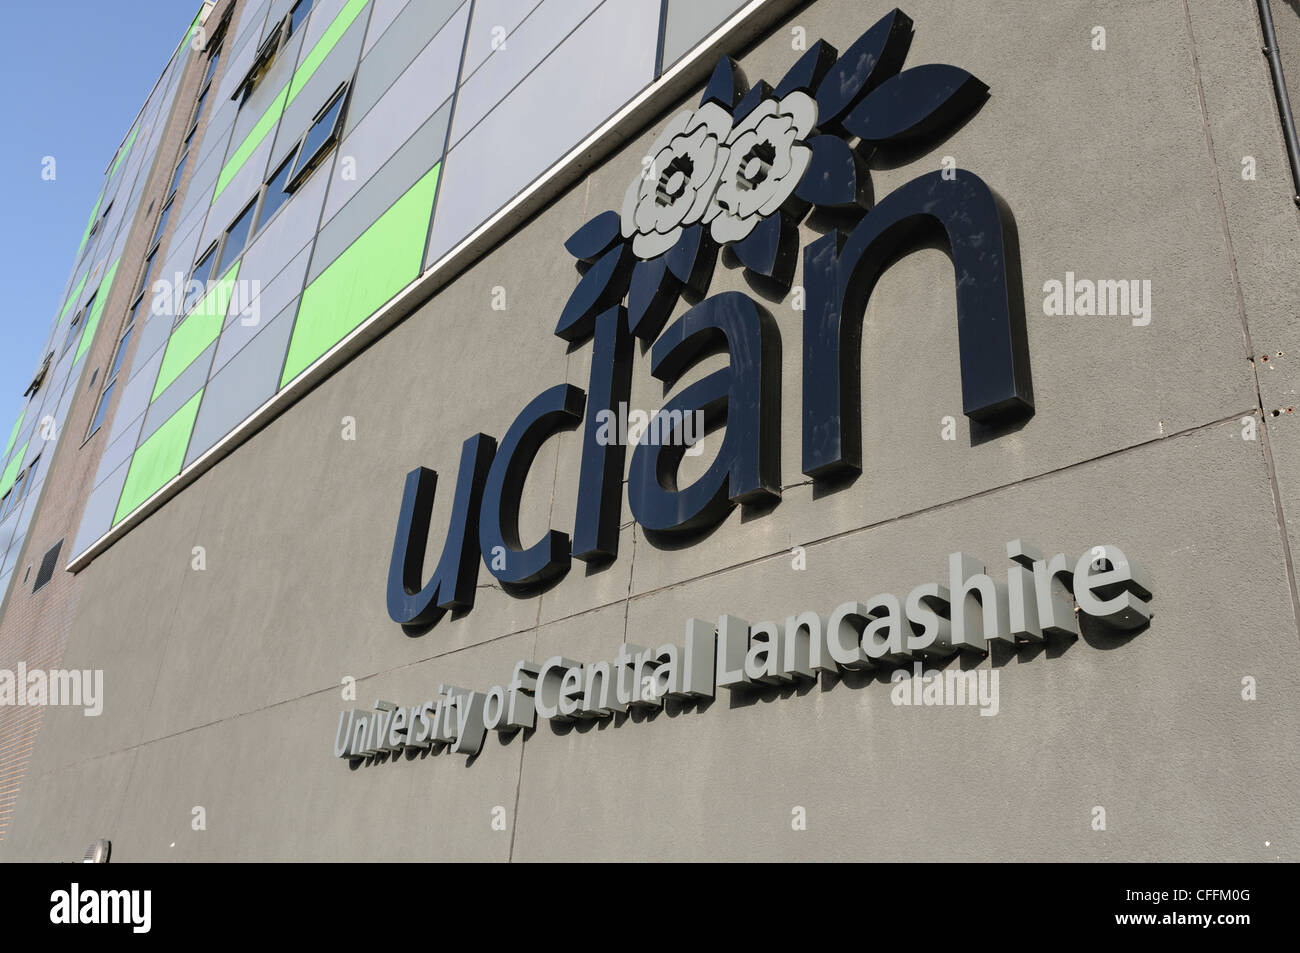 Sign on building for University of Central Lancashire (UCLAN), Preston Stock Photo